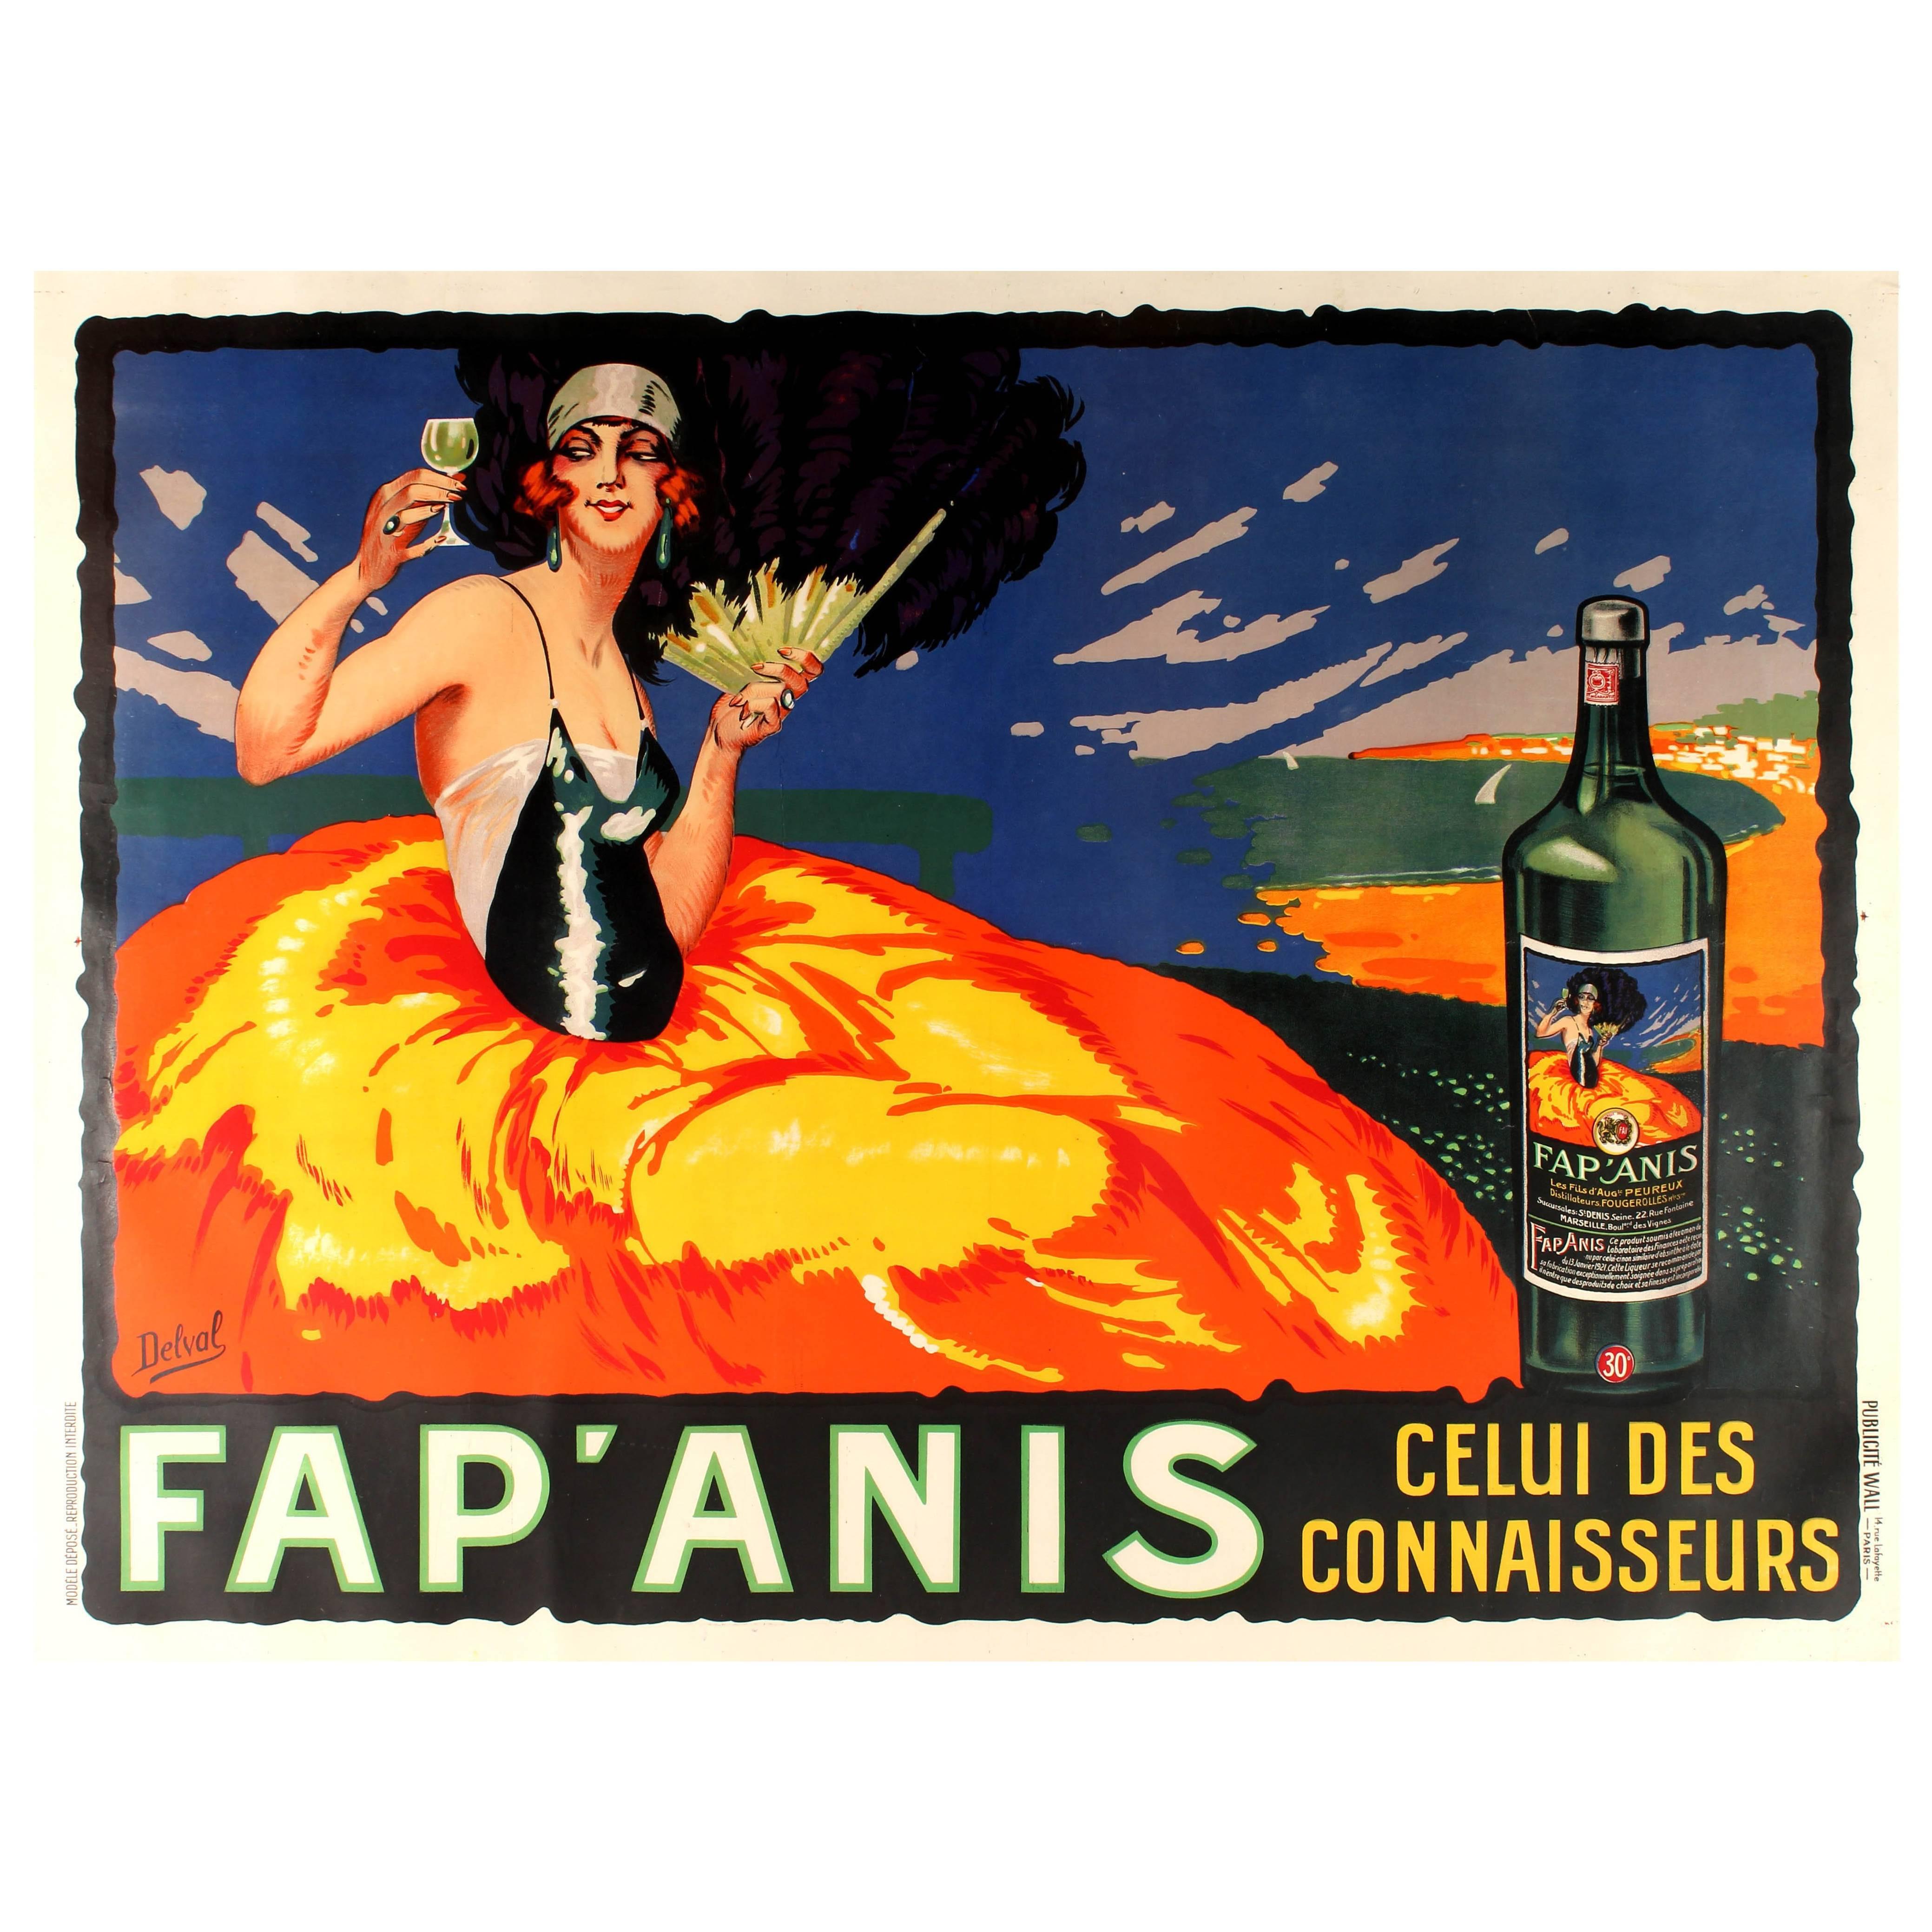 Large Original Vintage French Liquor Alcohol Drink Advertising Poster - Fap'anis